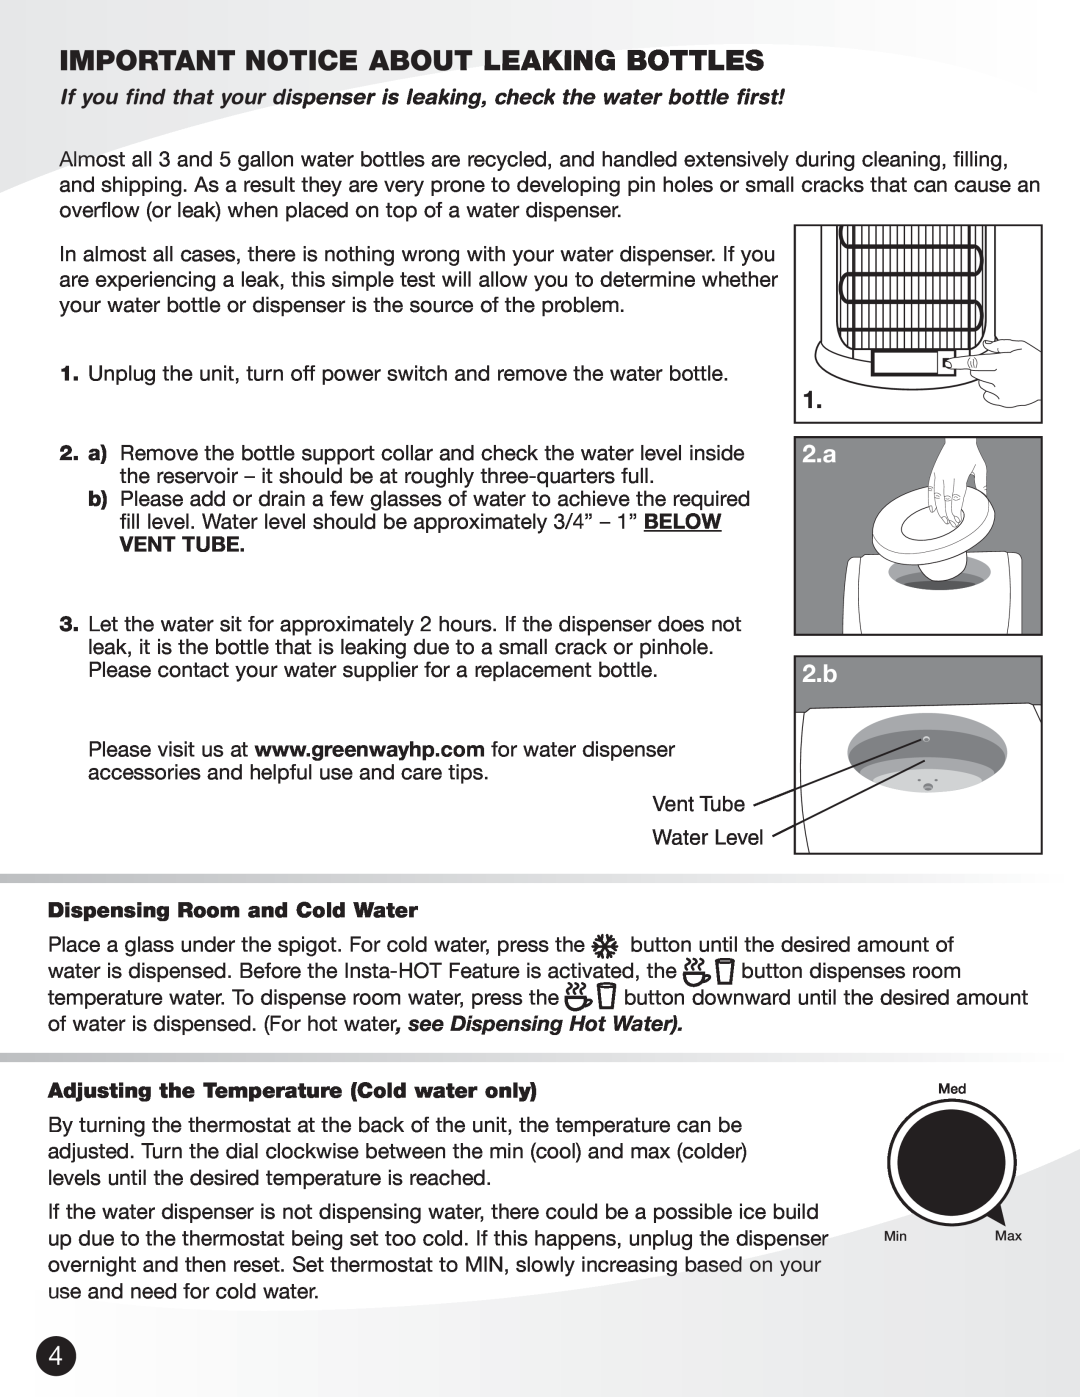 Greenway Home Products VWD8956BLS Important Notice About Leaking Bottles, Vent Tube, Dispensing Room and Cold Water 